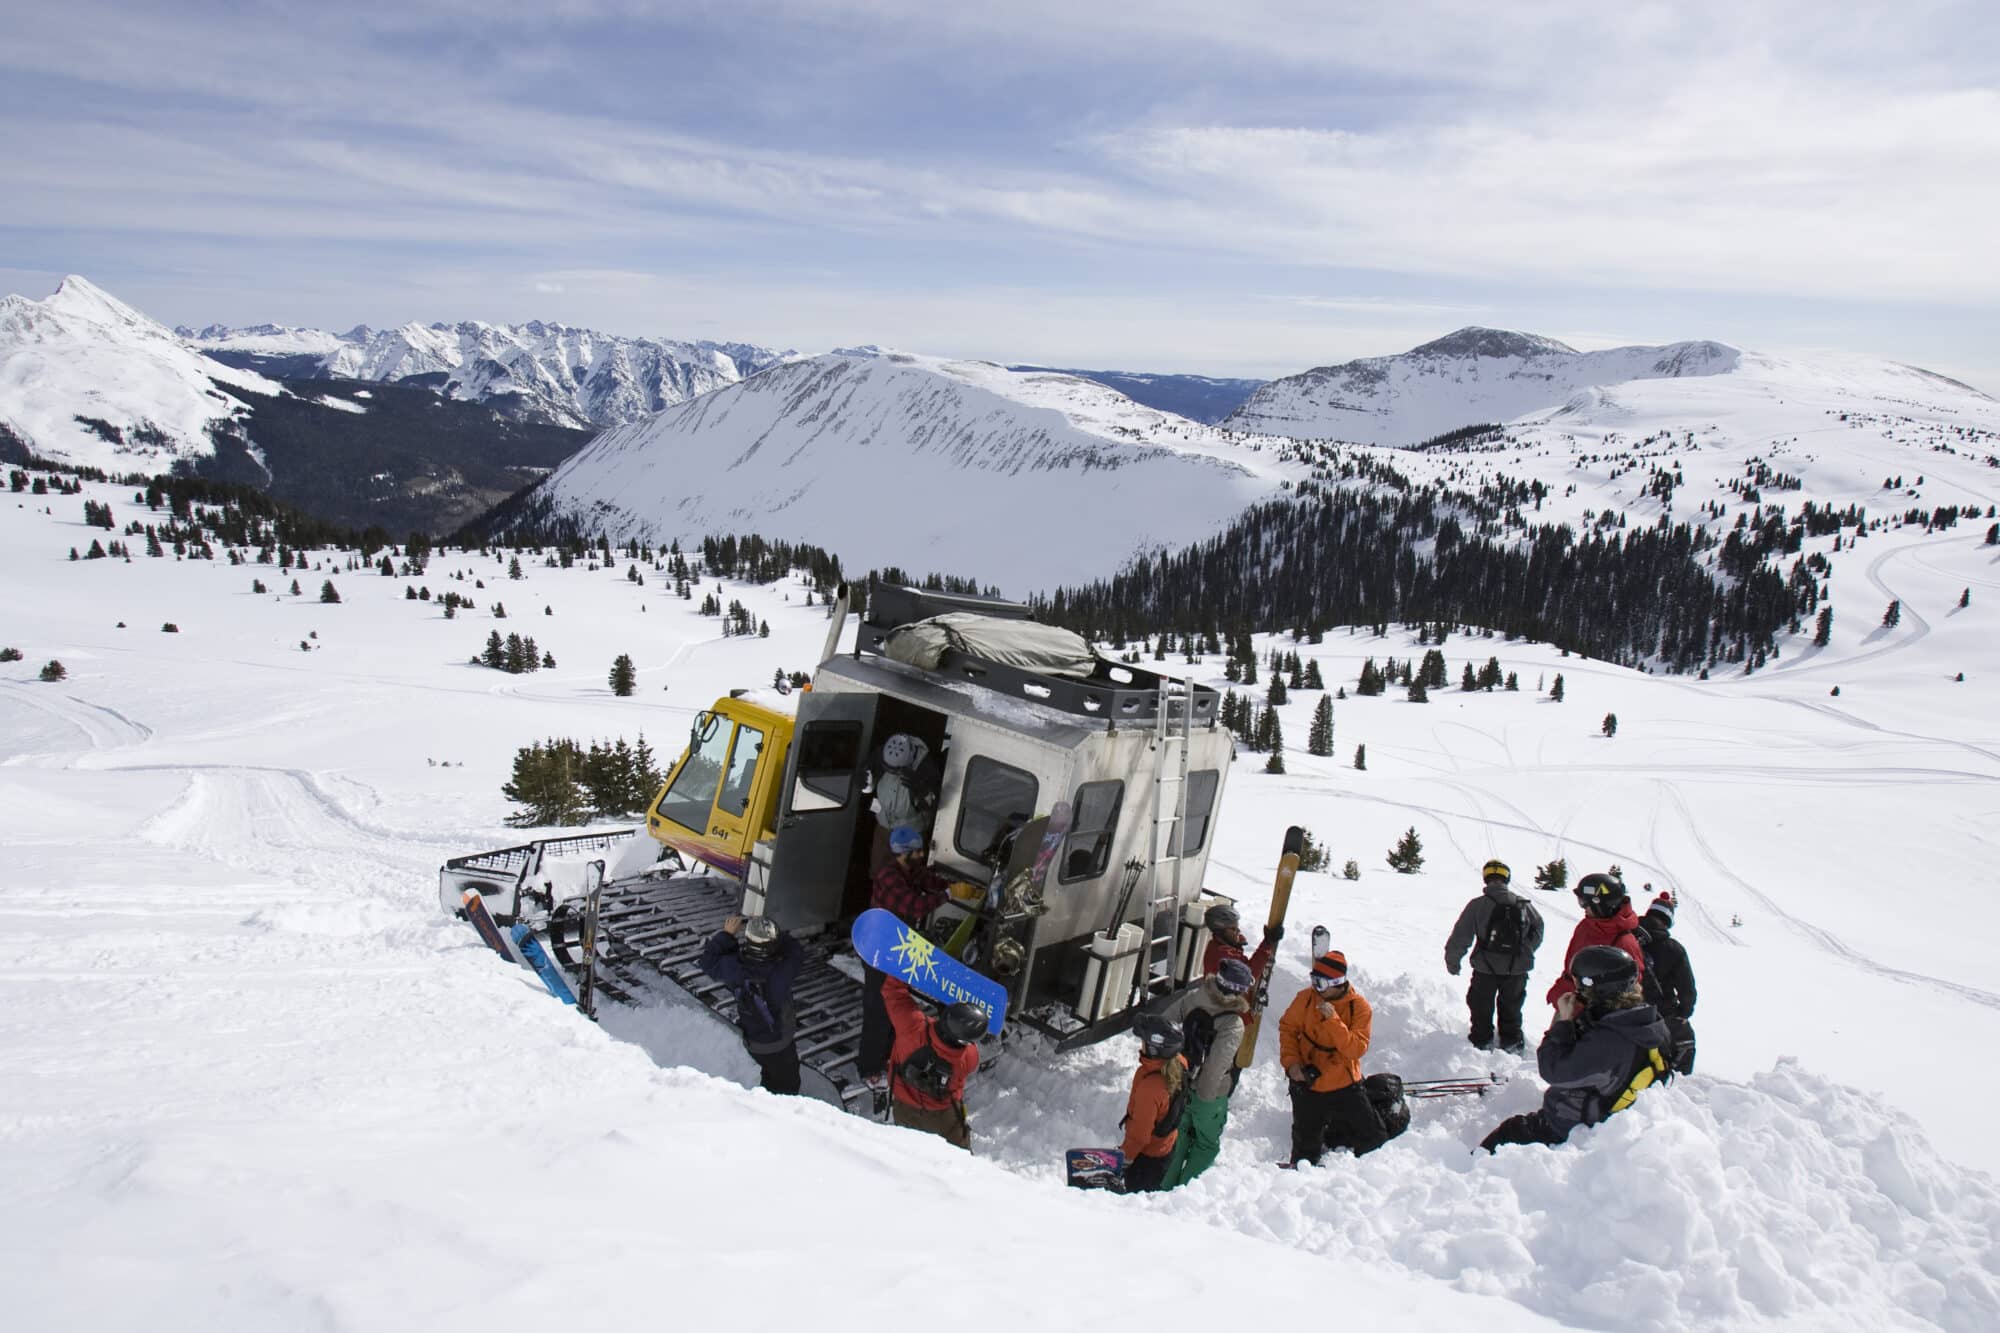 Group unloads the snowcat and looks out at the vast amount of terrain